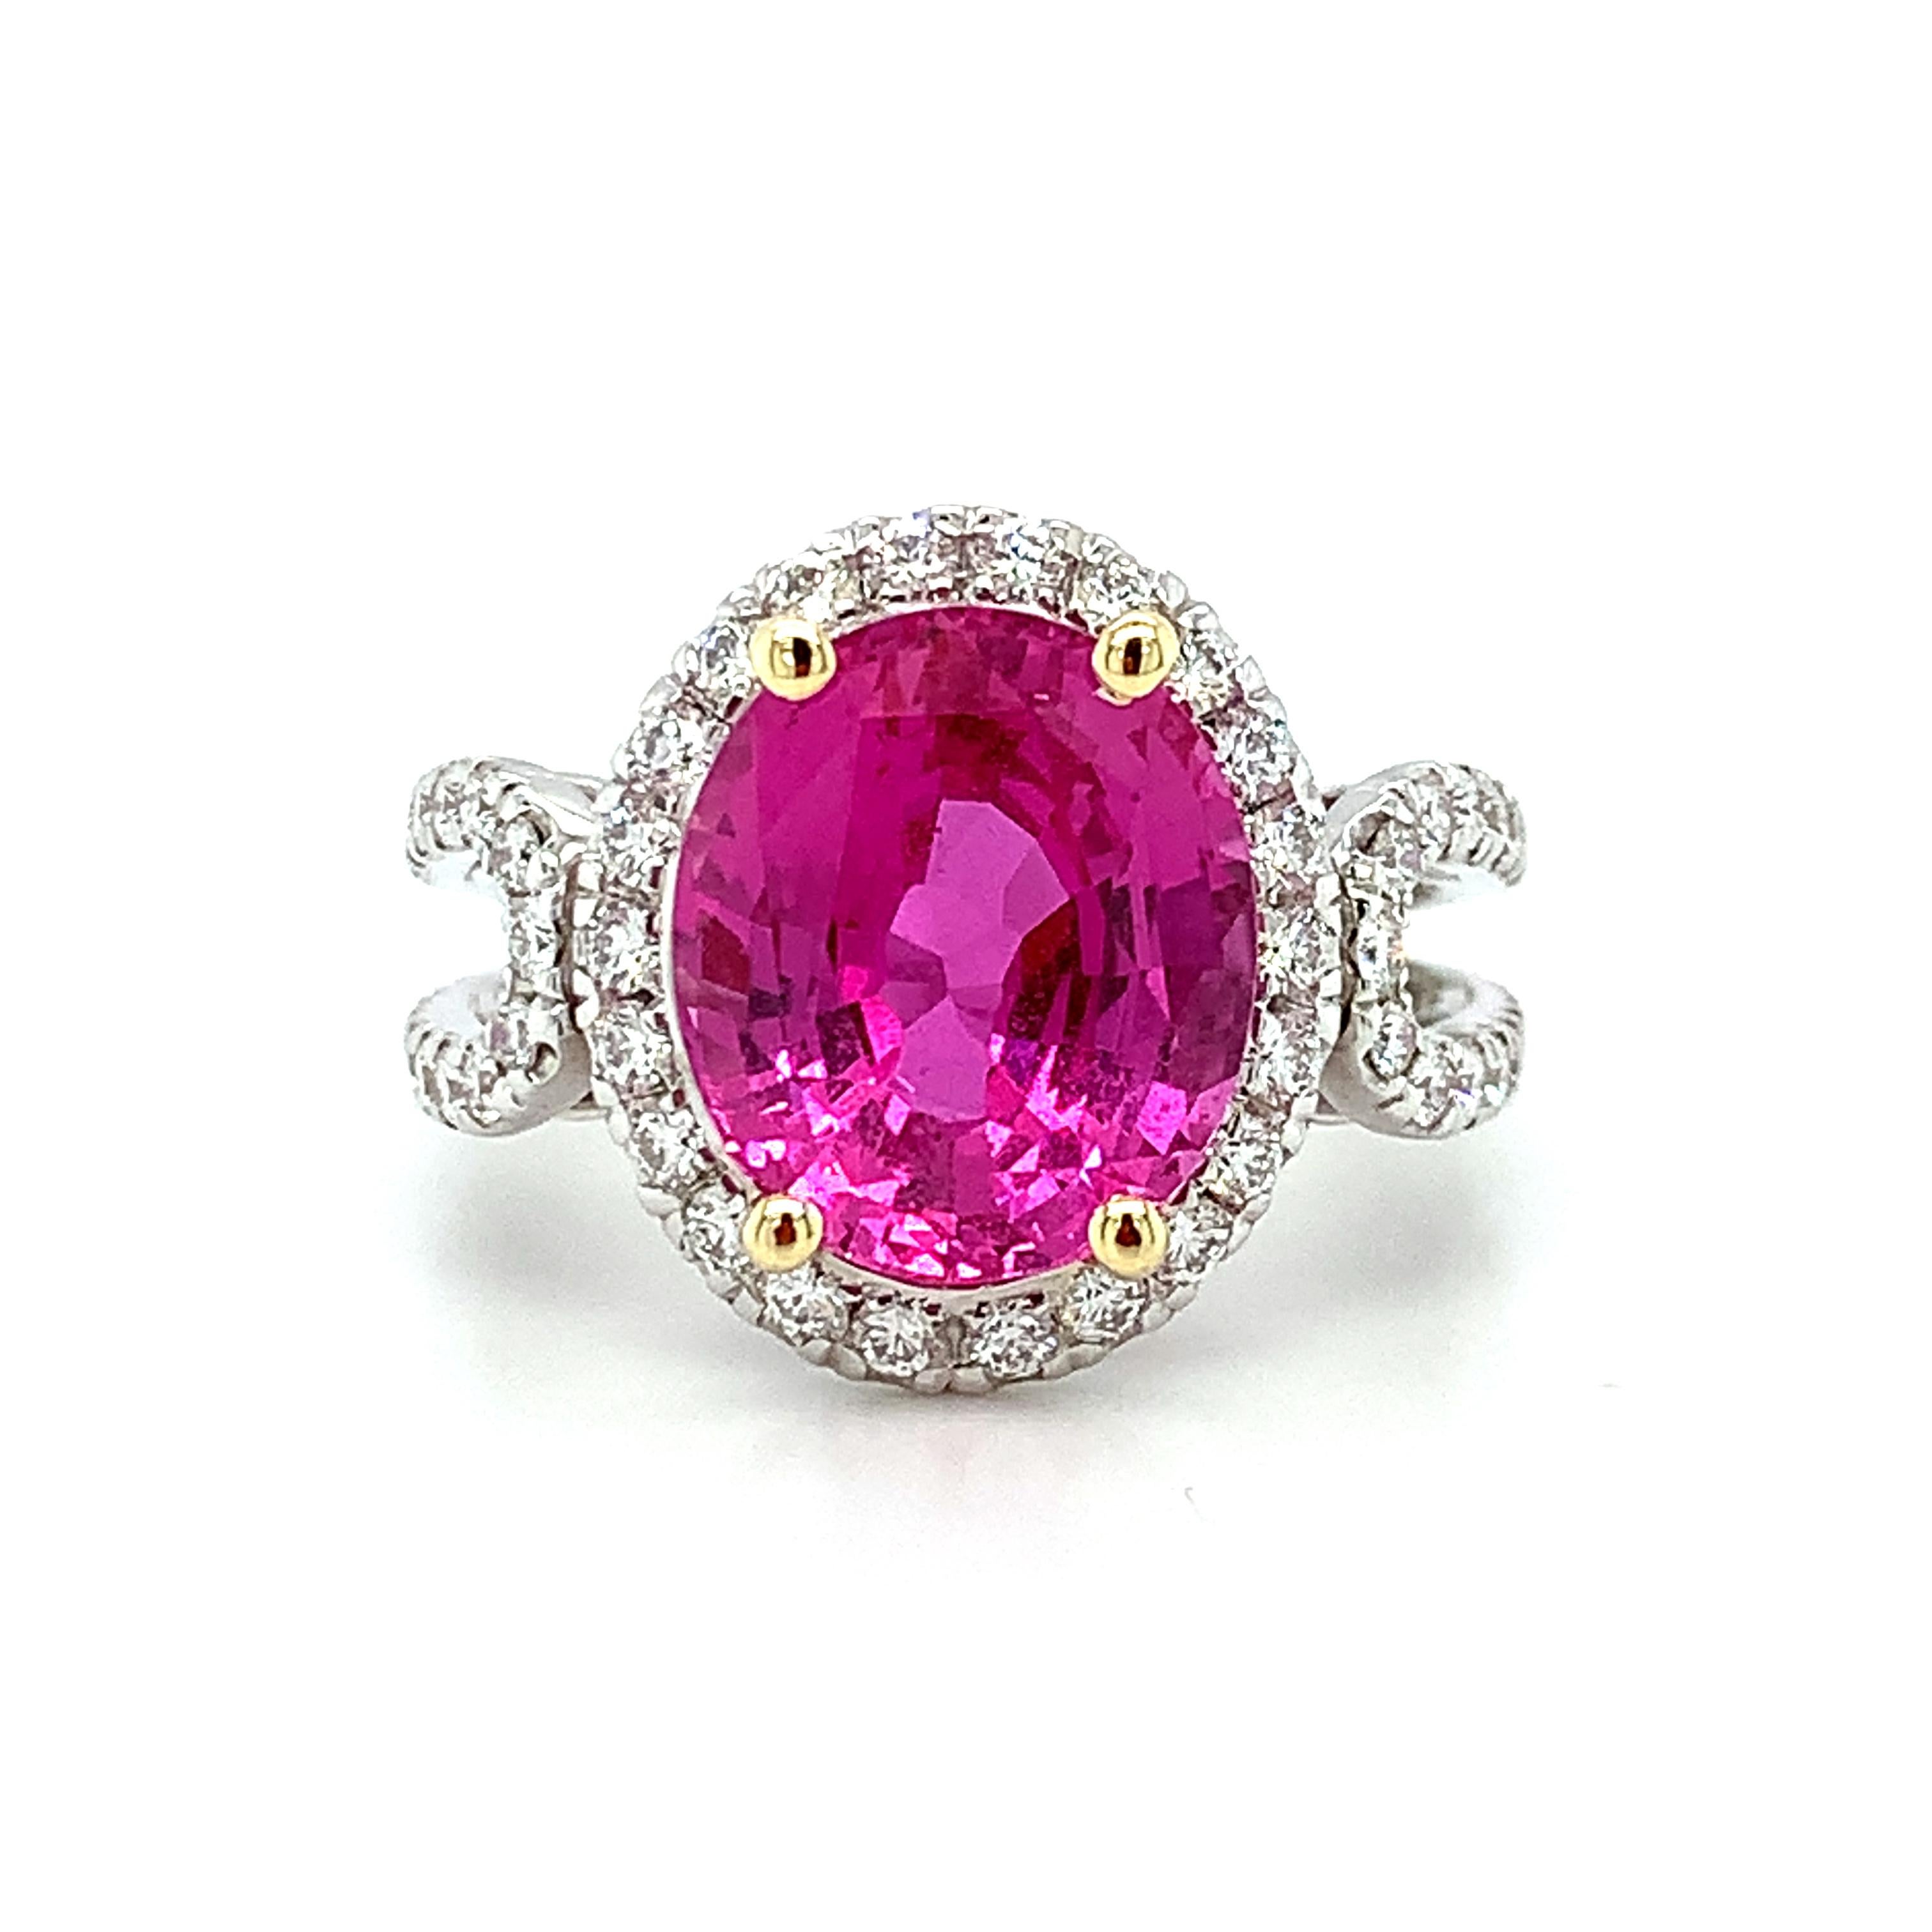 Artisan GIA Certified Unheated 5.73 Carat Pink Sapphire and Diamond Cocktail Ring For Sale